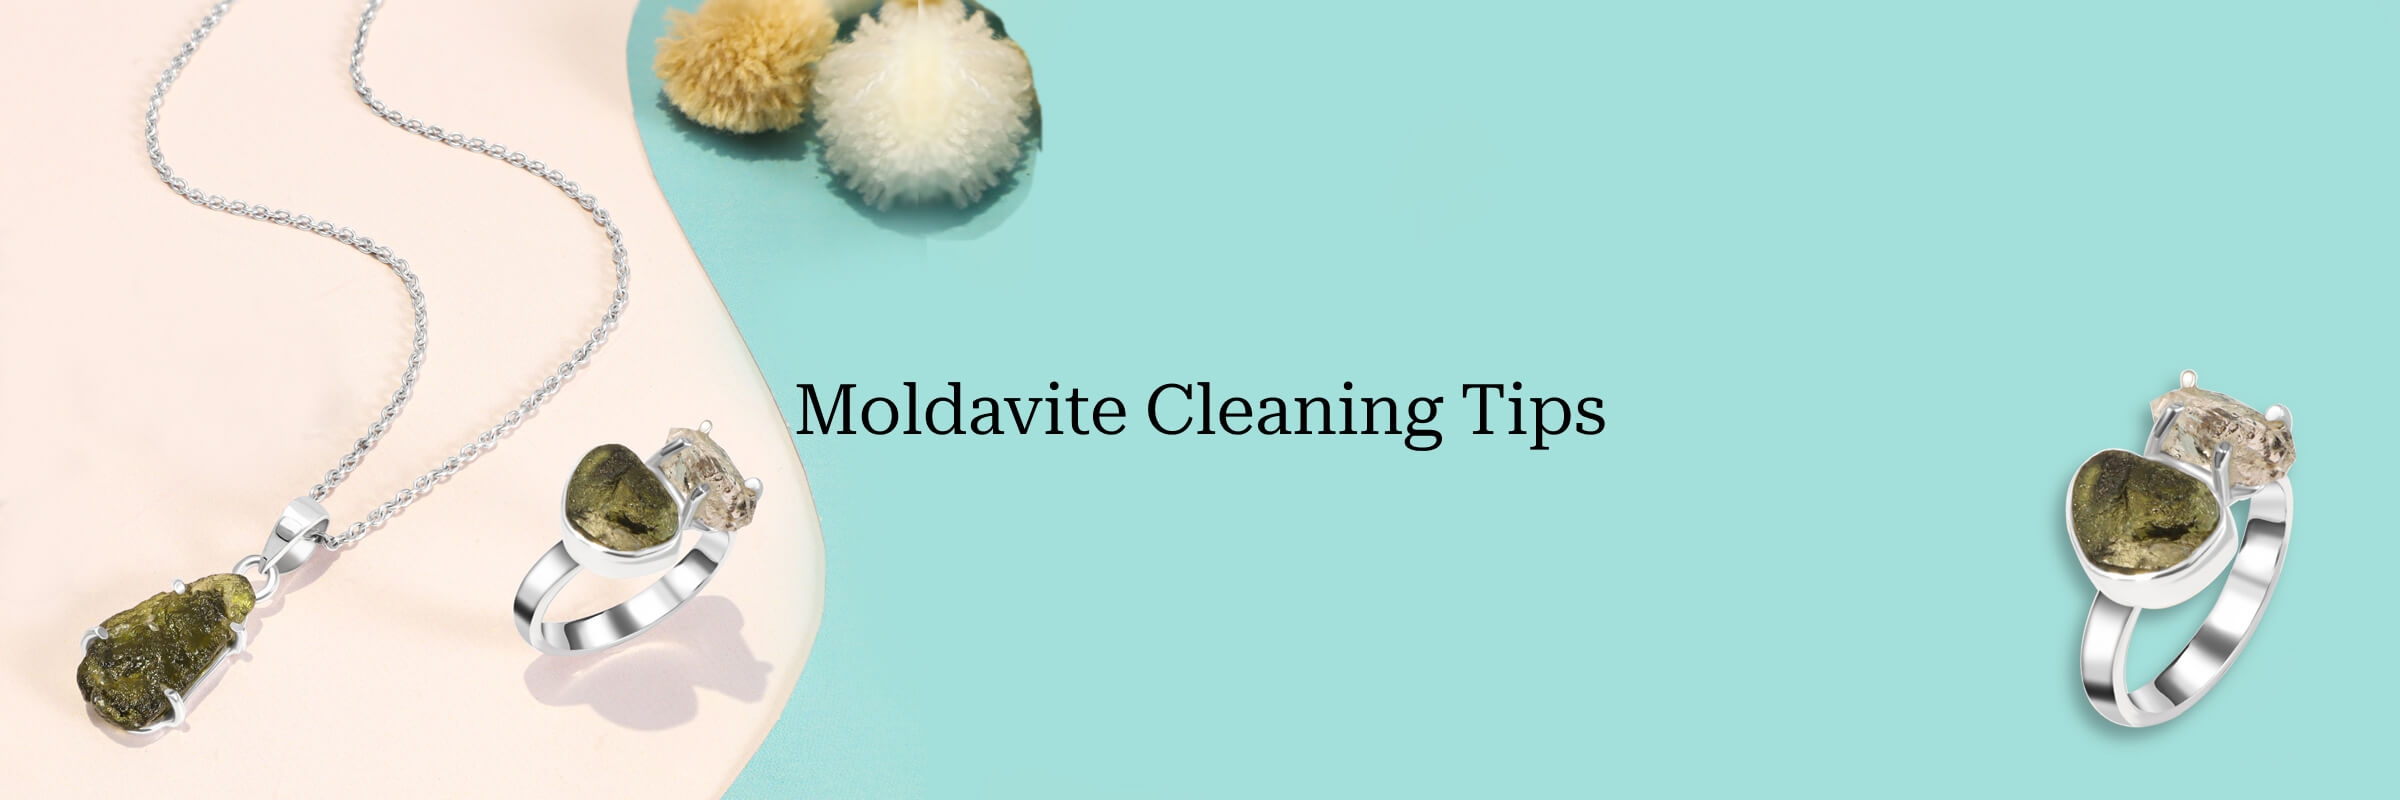 How To Cleanse Your Moldavite